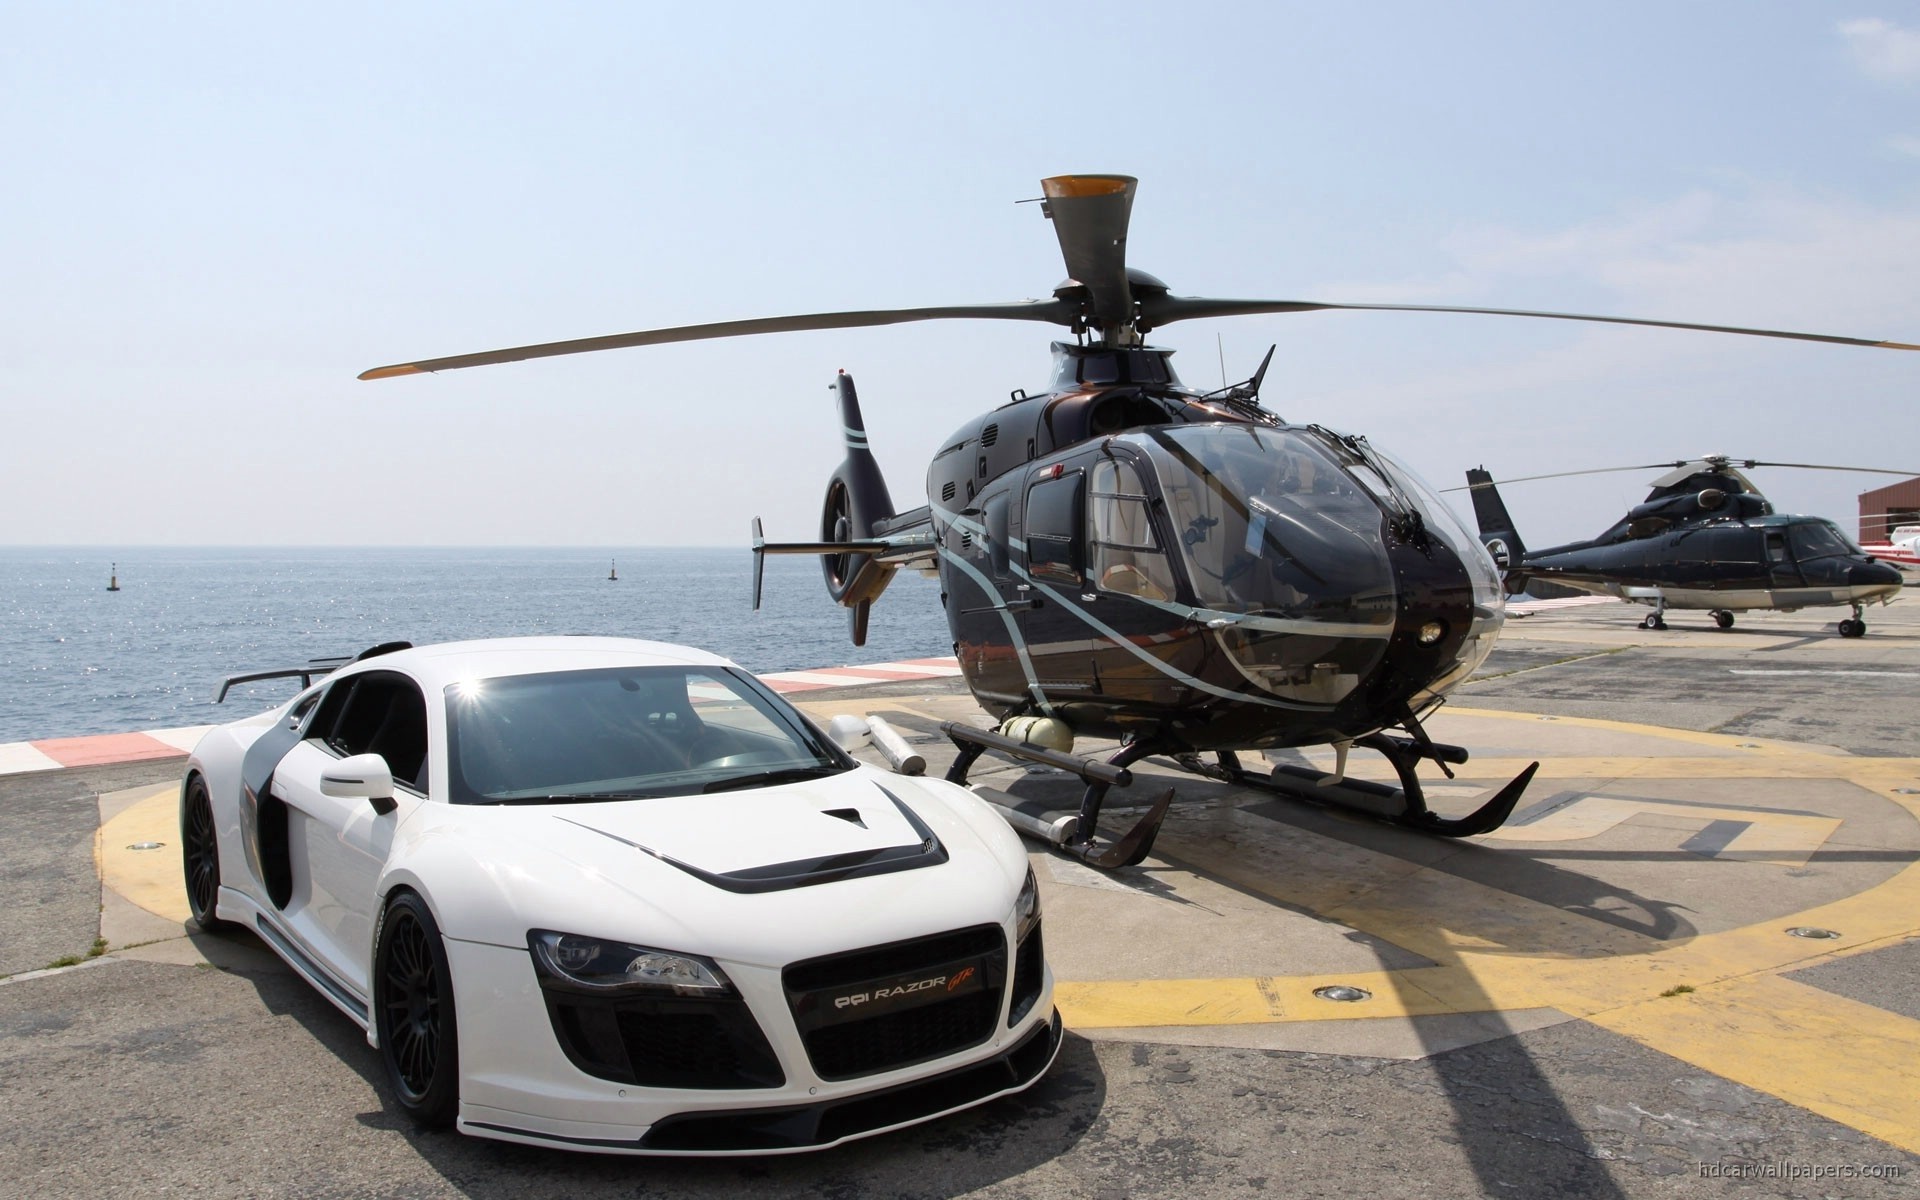 General 1920x1200 car helicopters white cars vehicle aircraft bodykit Audi R8 Eurocopter EC135 landing pad